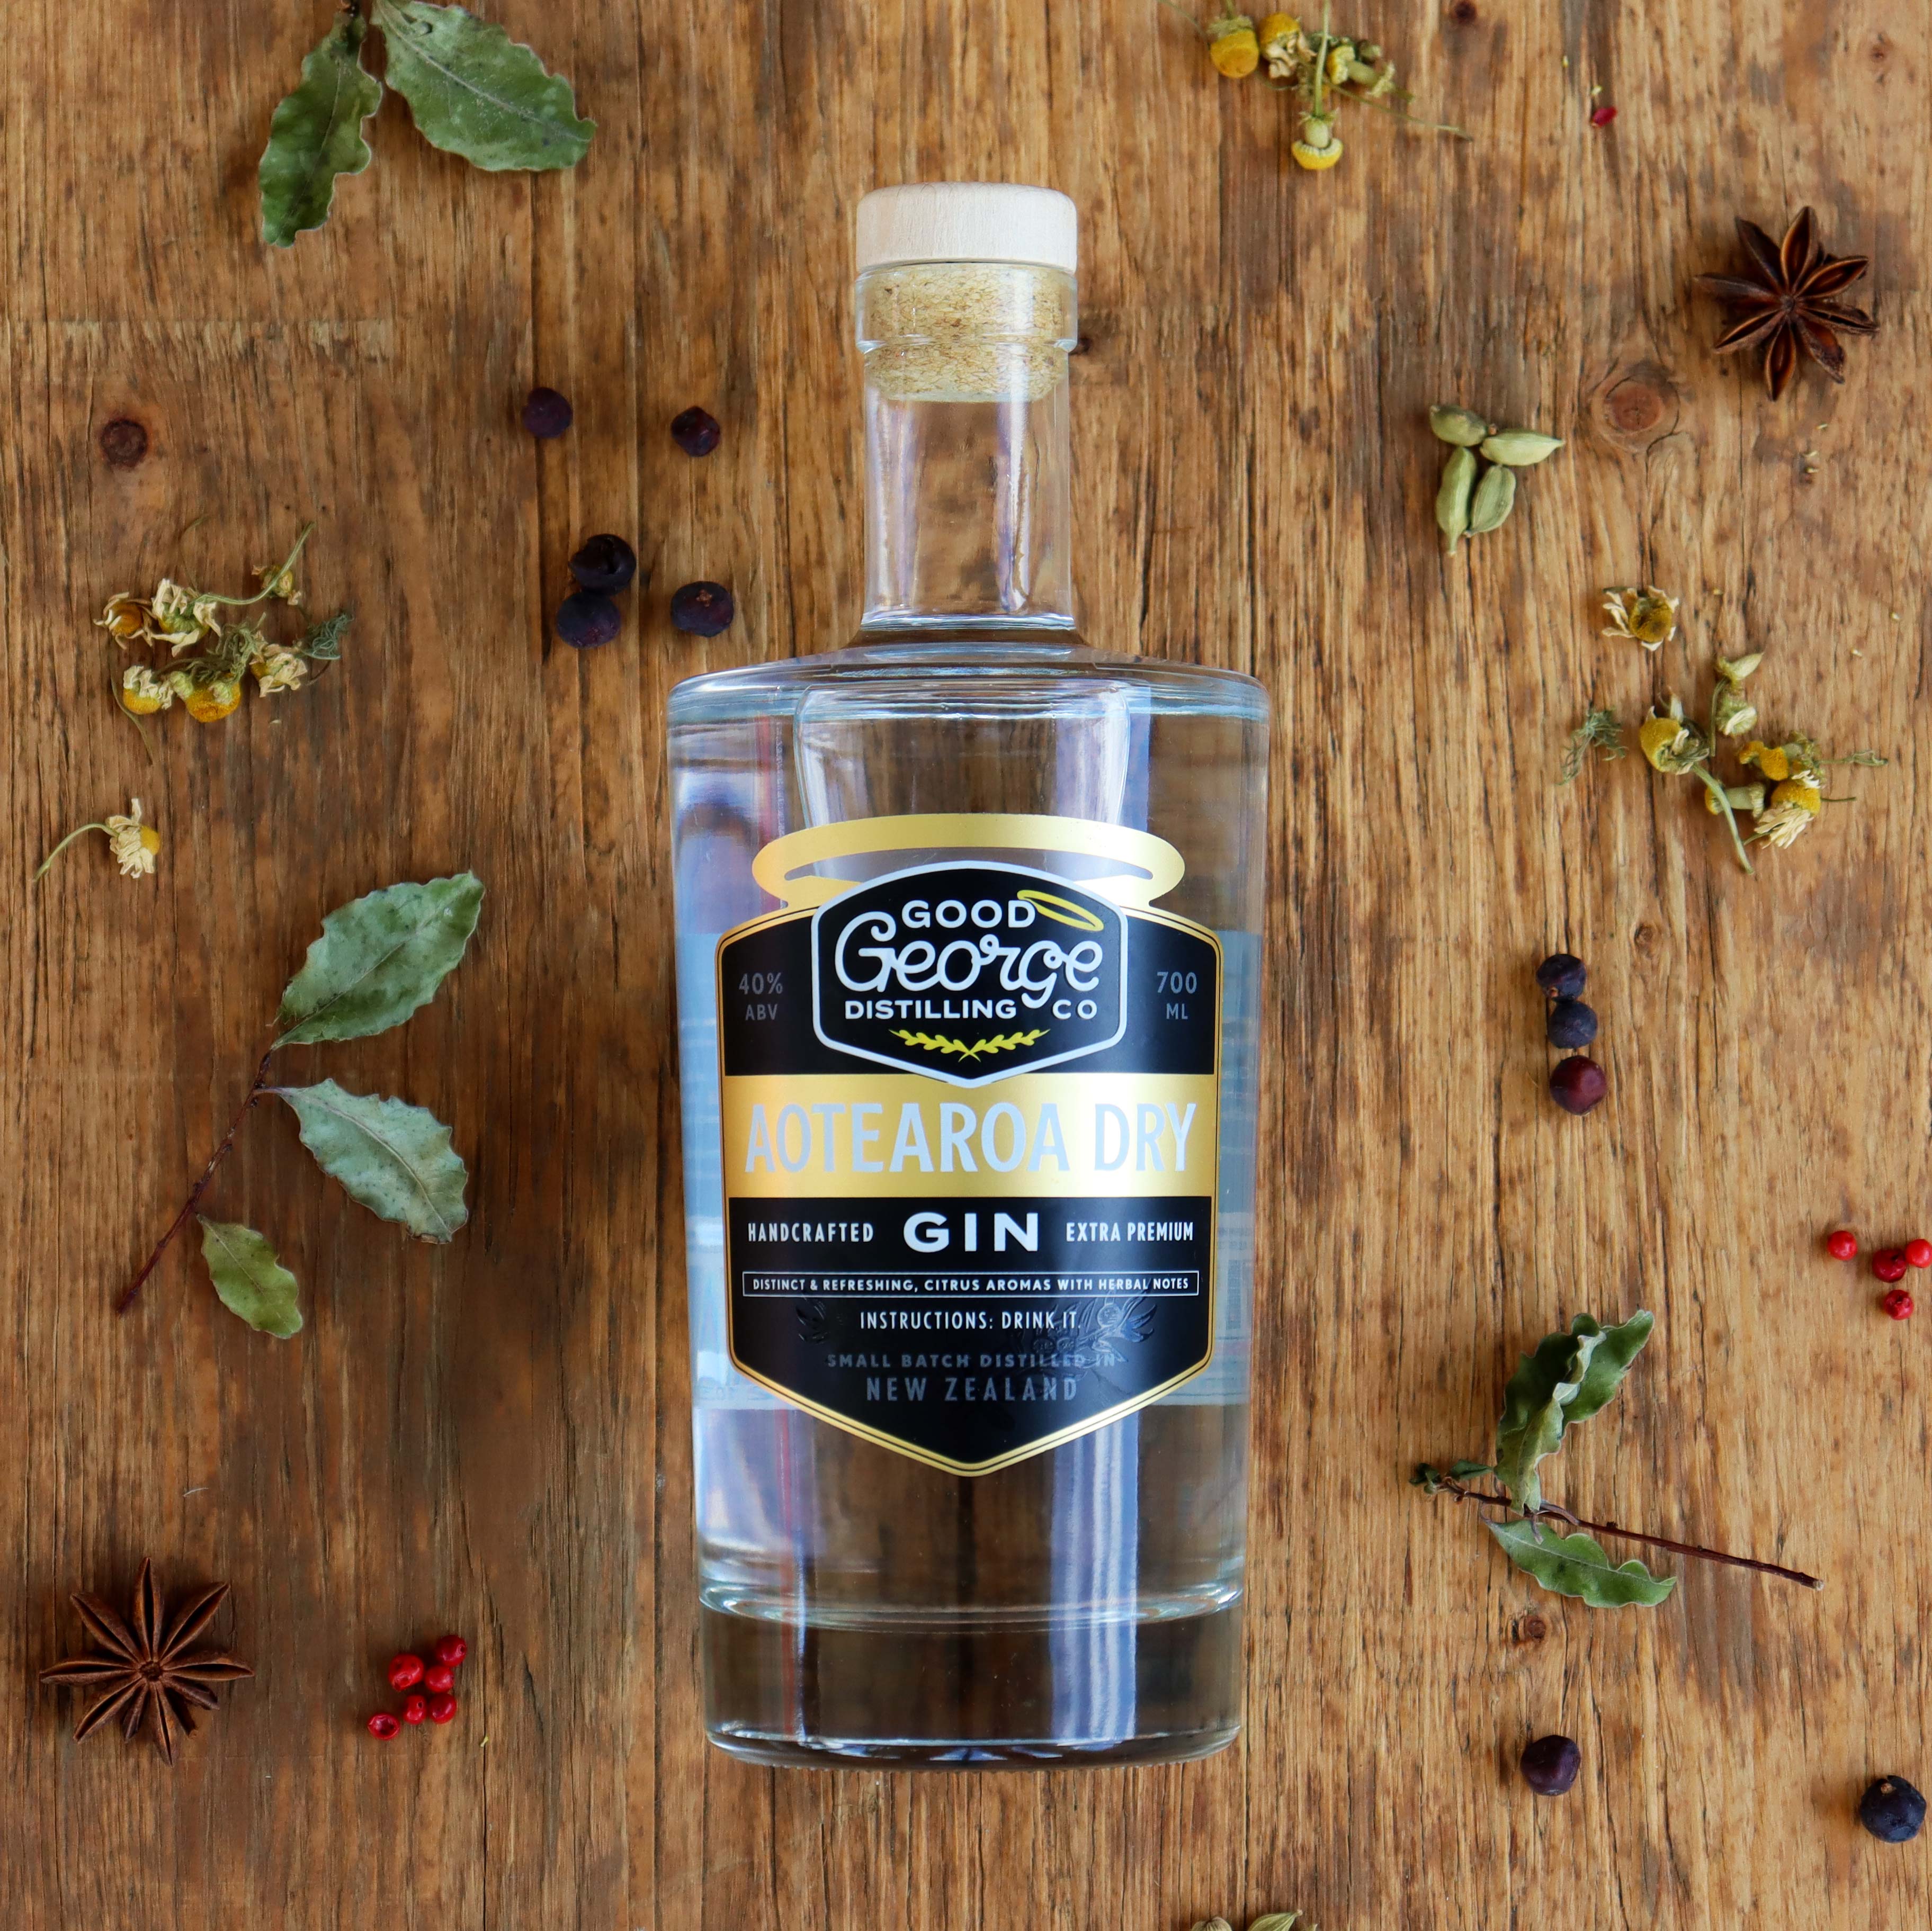 Good George Aotearoa Dry Gin 700ml Bottle with herbs and spices that went into the gin making process